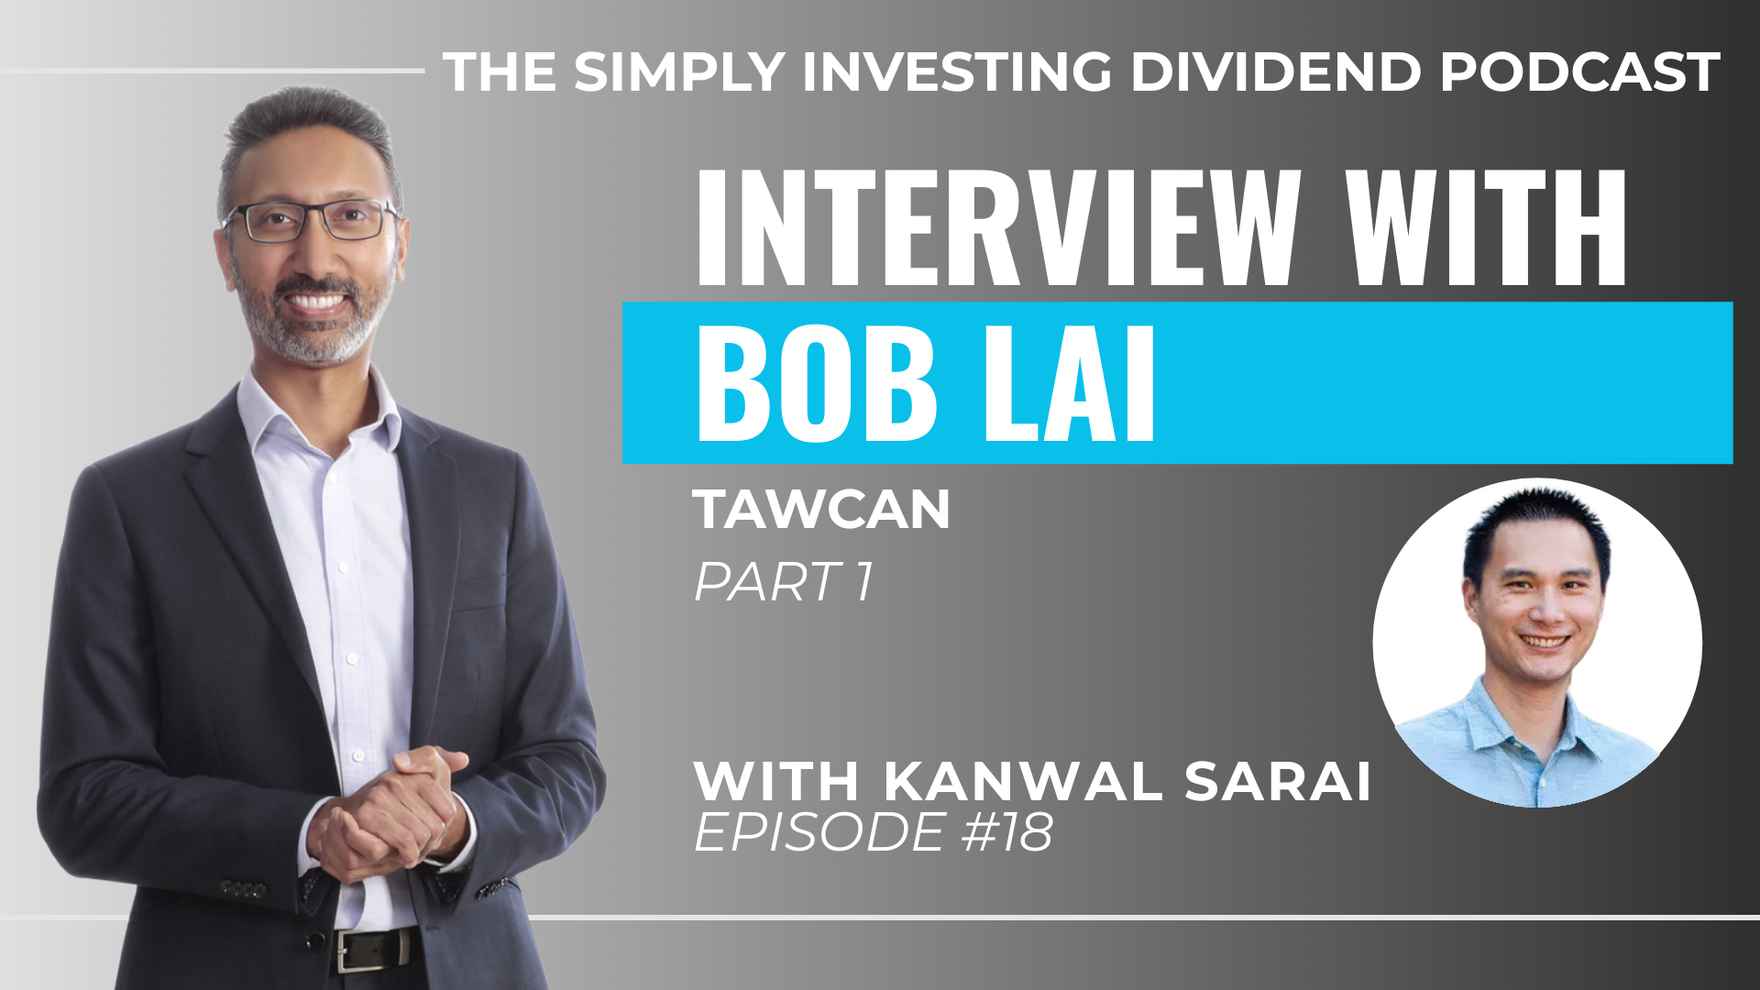 Simply Investing Dividend Podcast Episode 18 - Interview with Bob Lai of Tawcan (part 1)